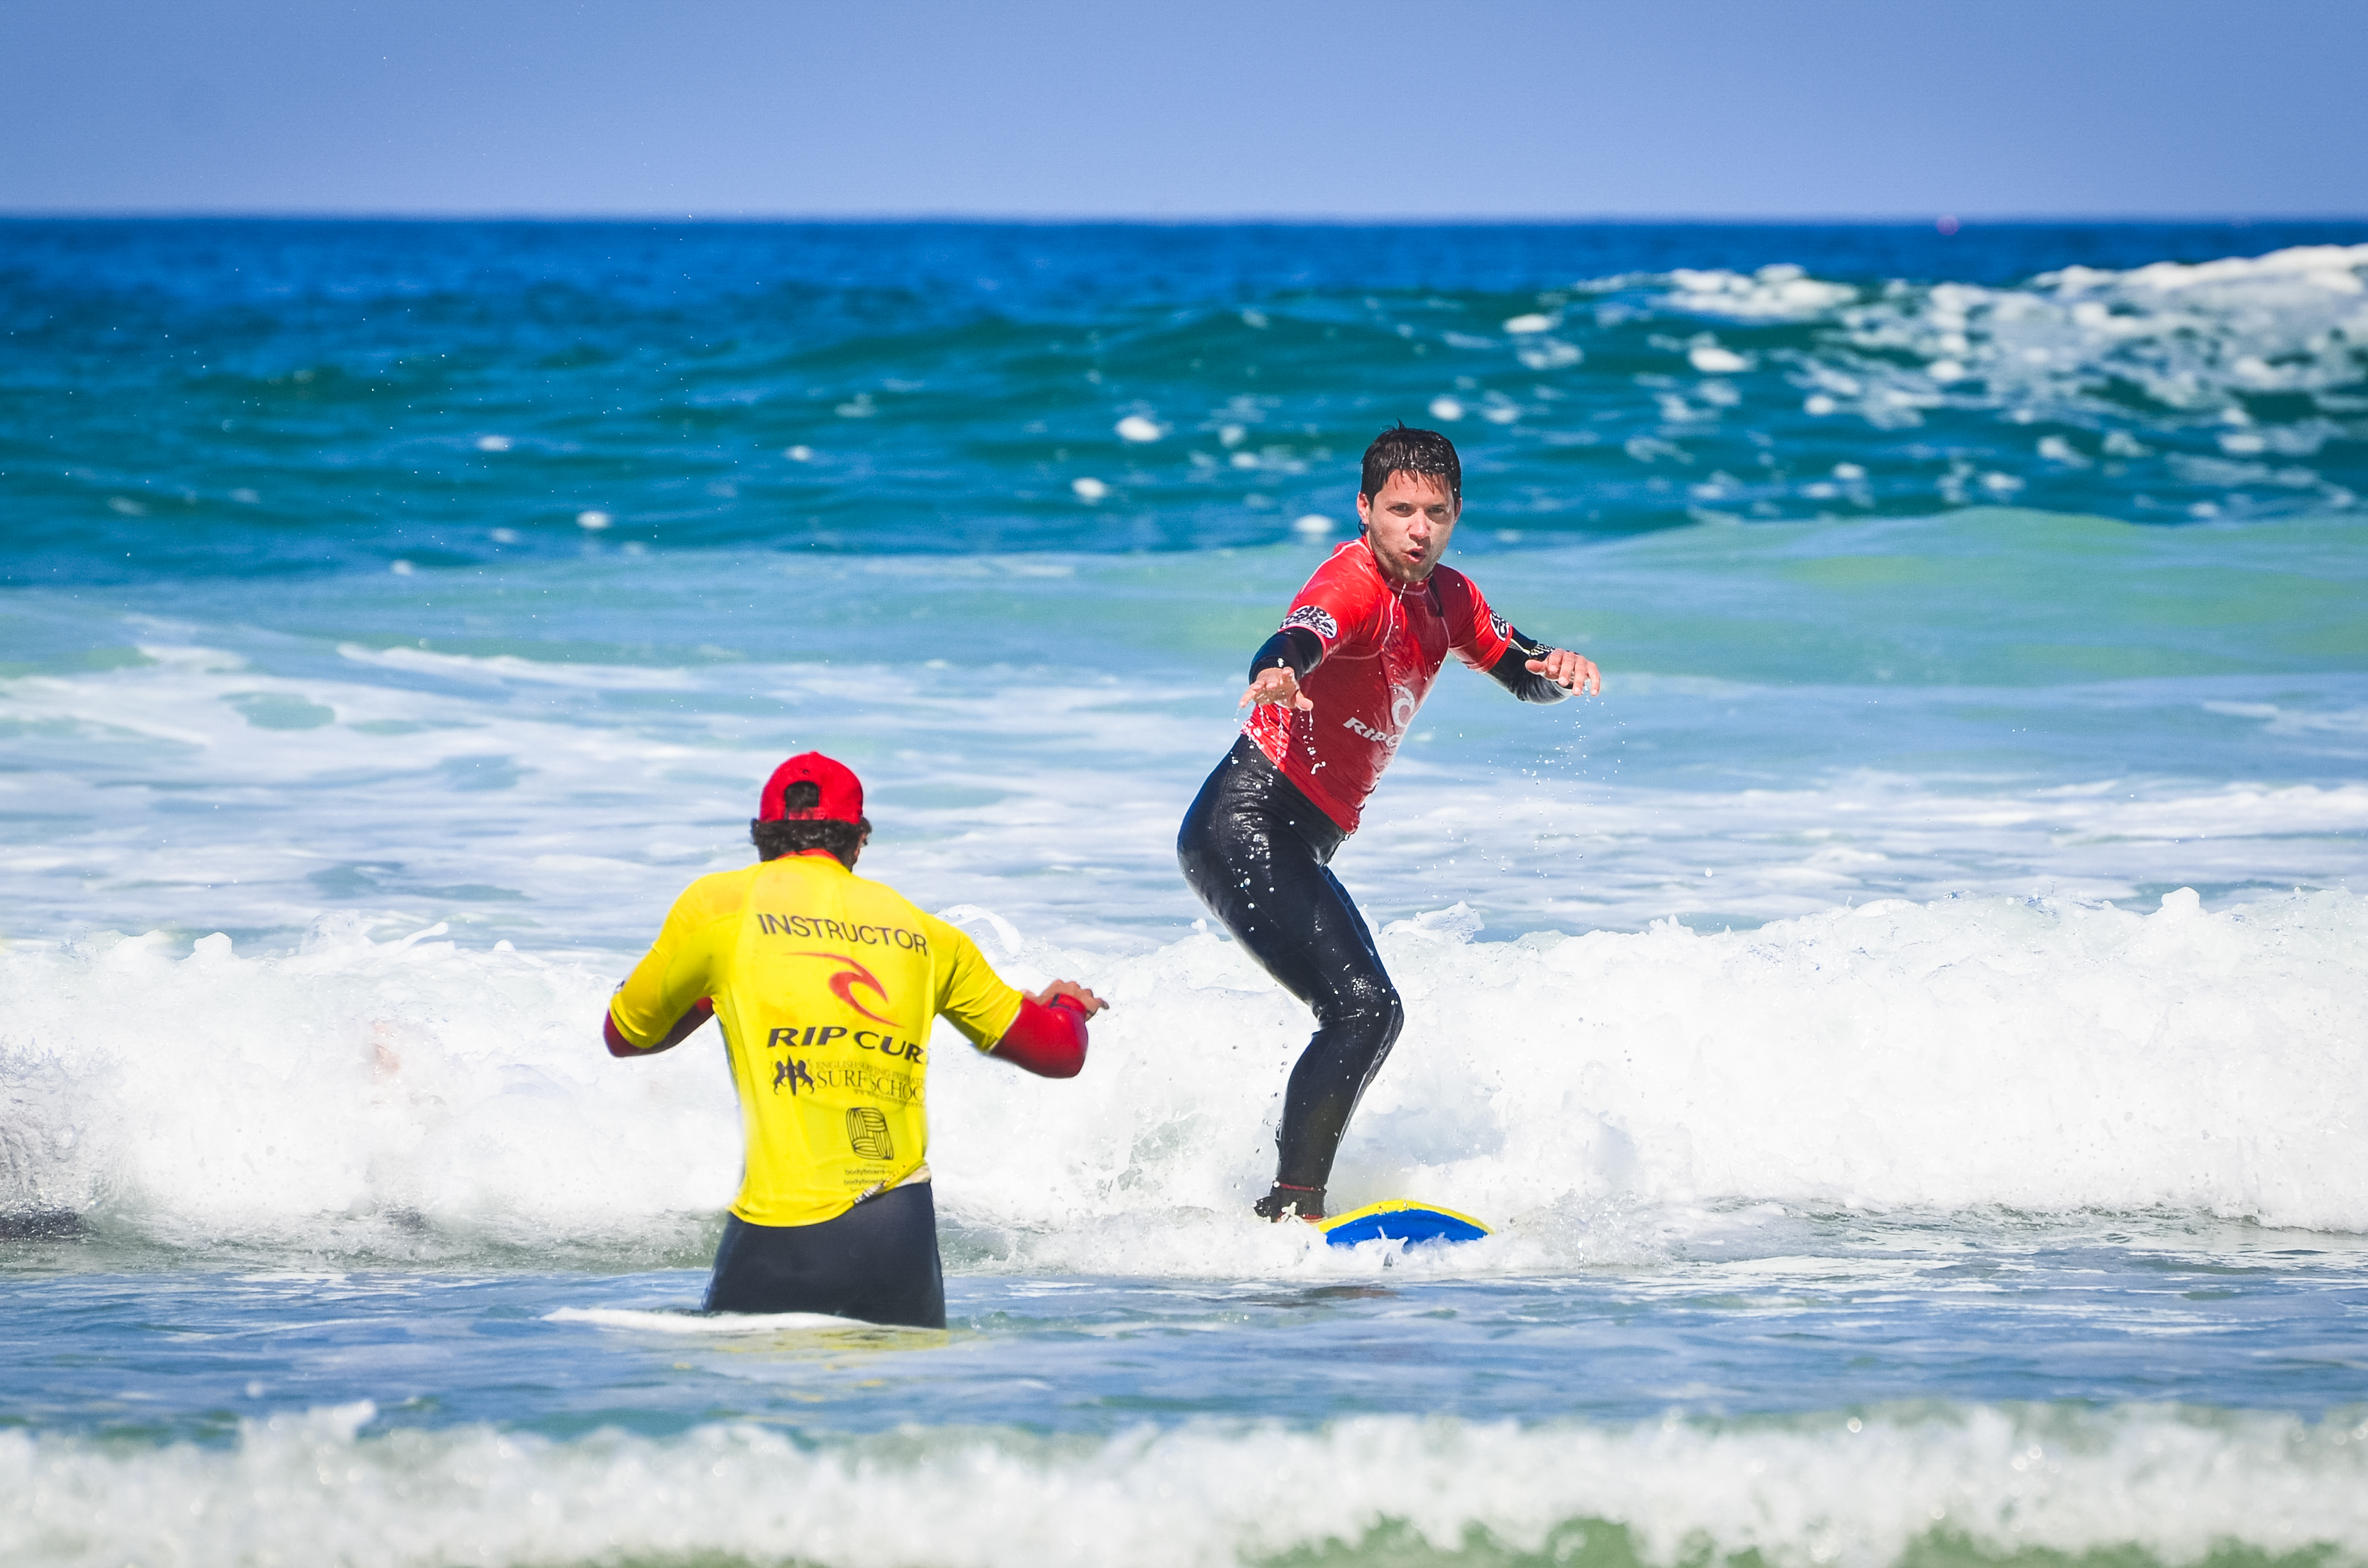 Have a fun time surfing in Newquay